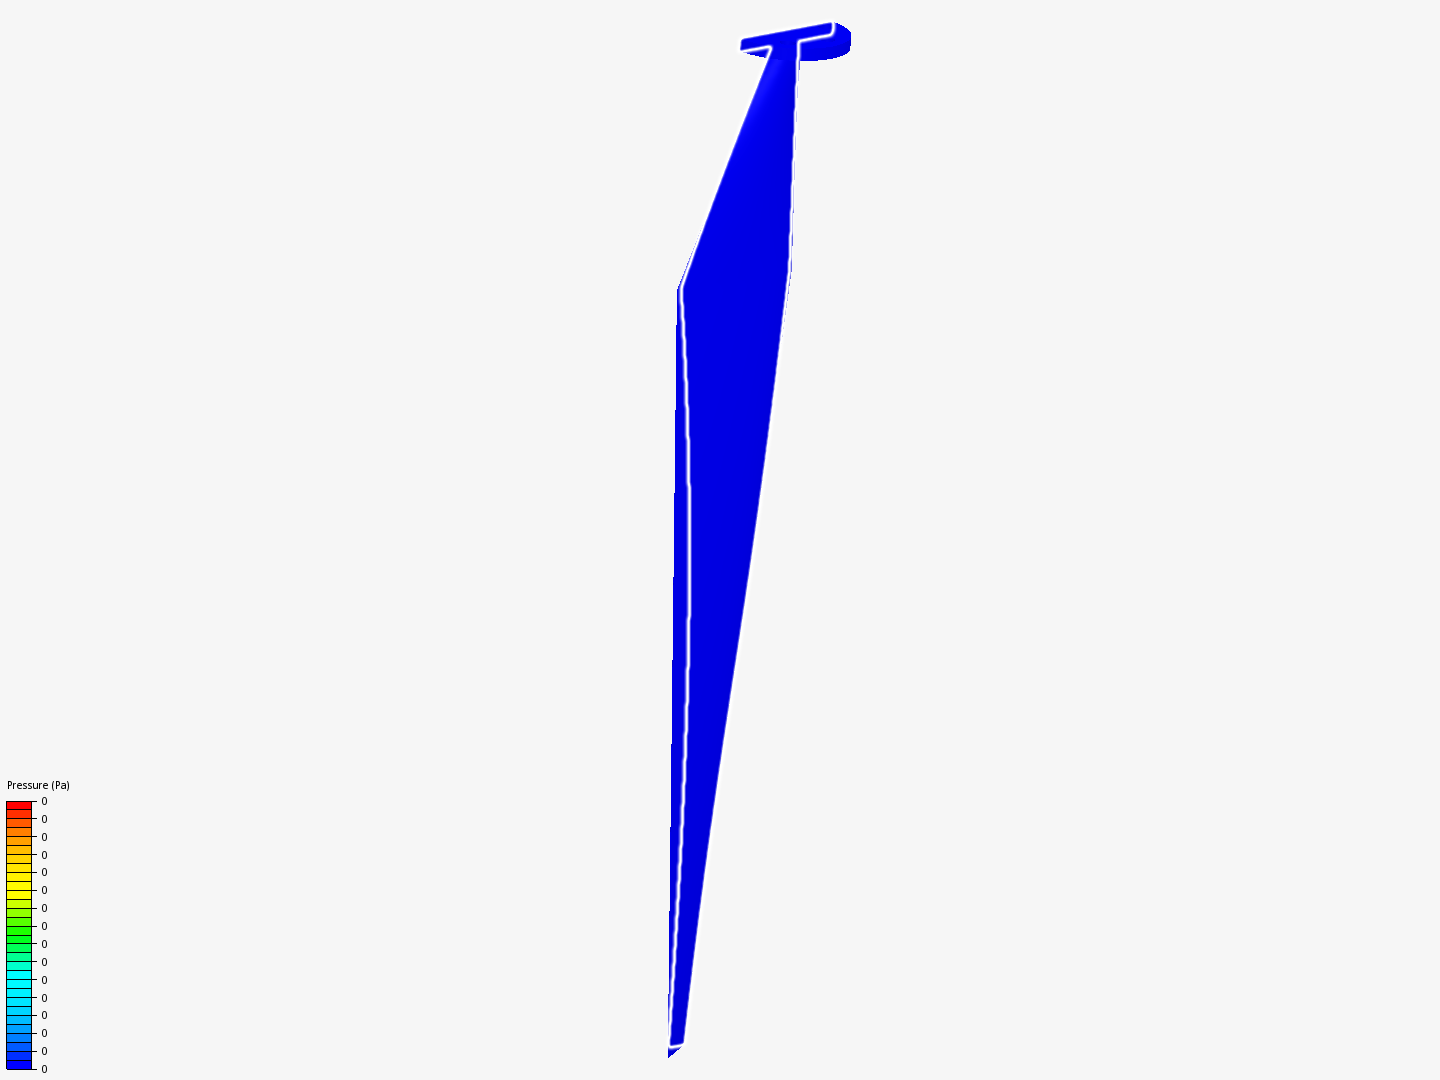 cfd of wind blade image